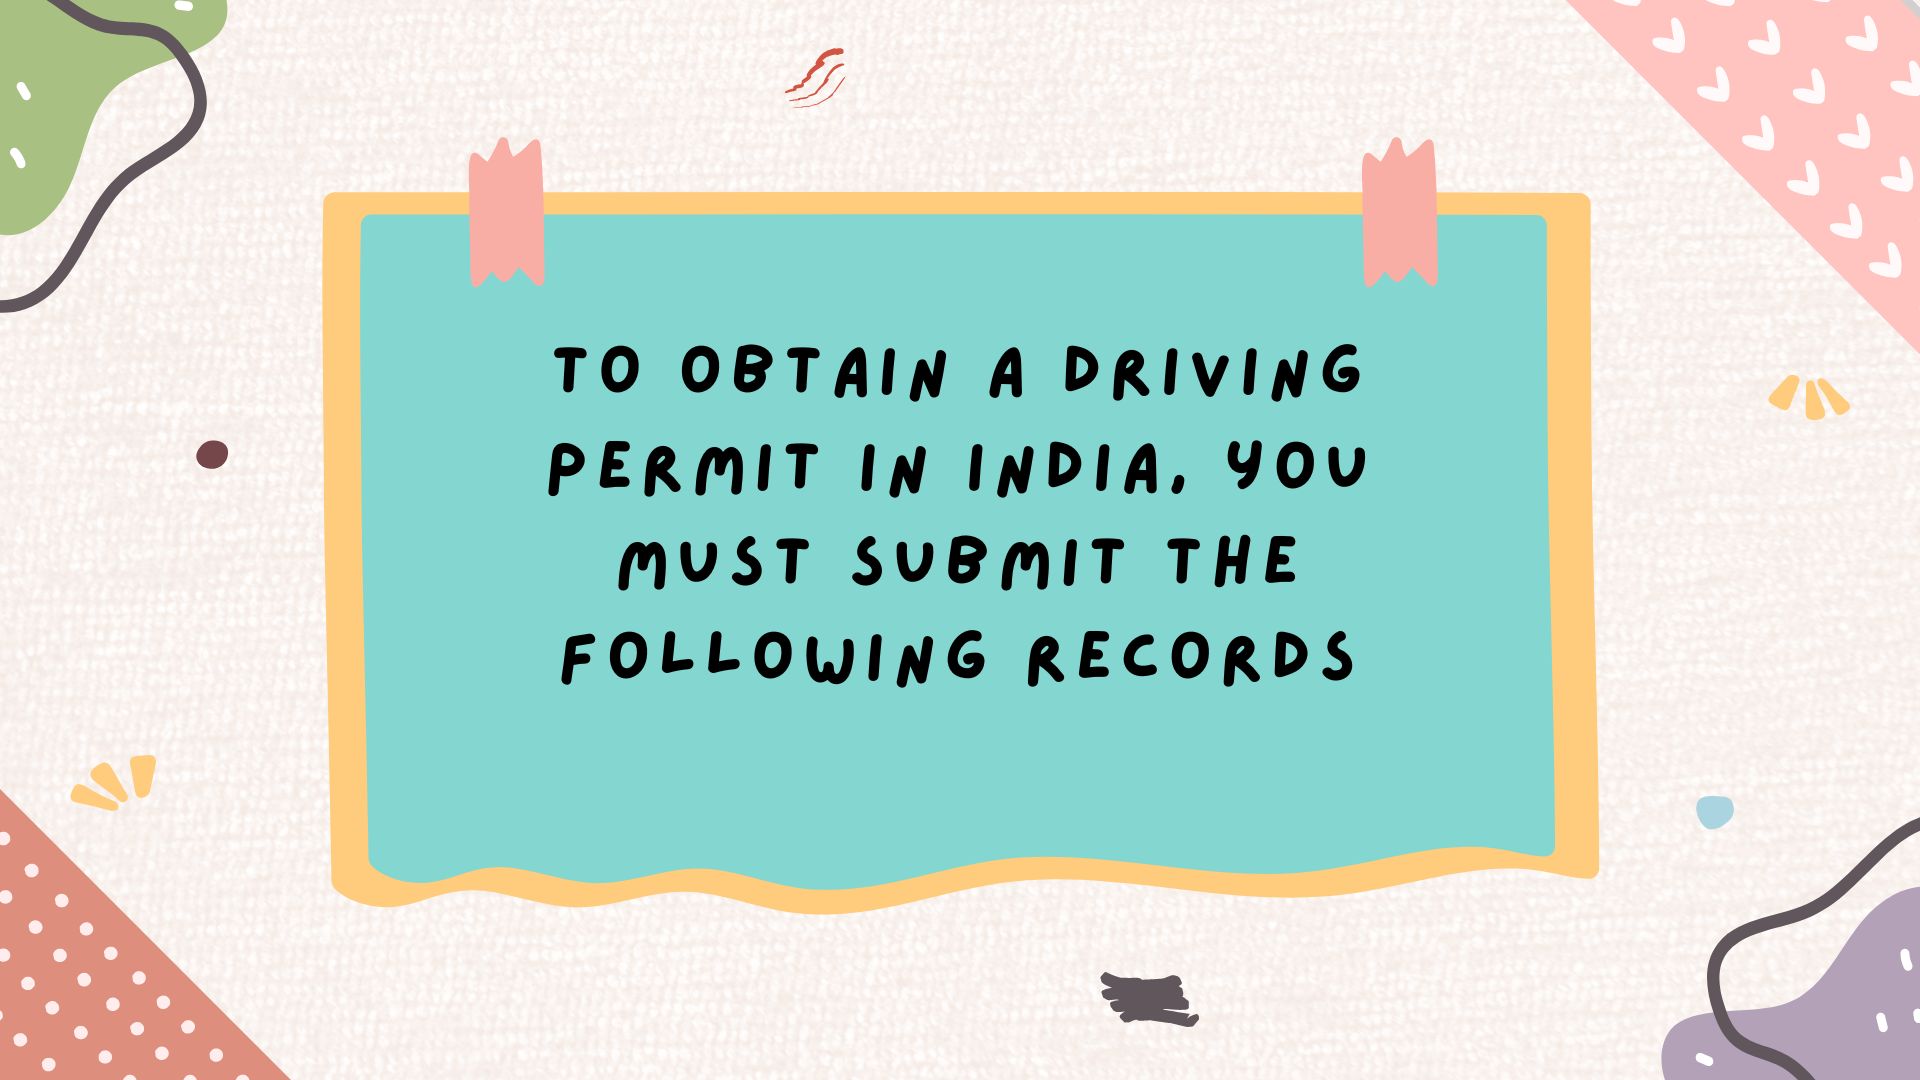 To obtain a driving permit in India, you must submit the following records